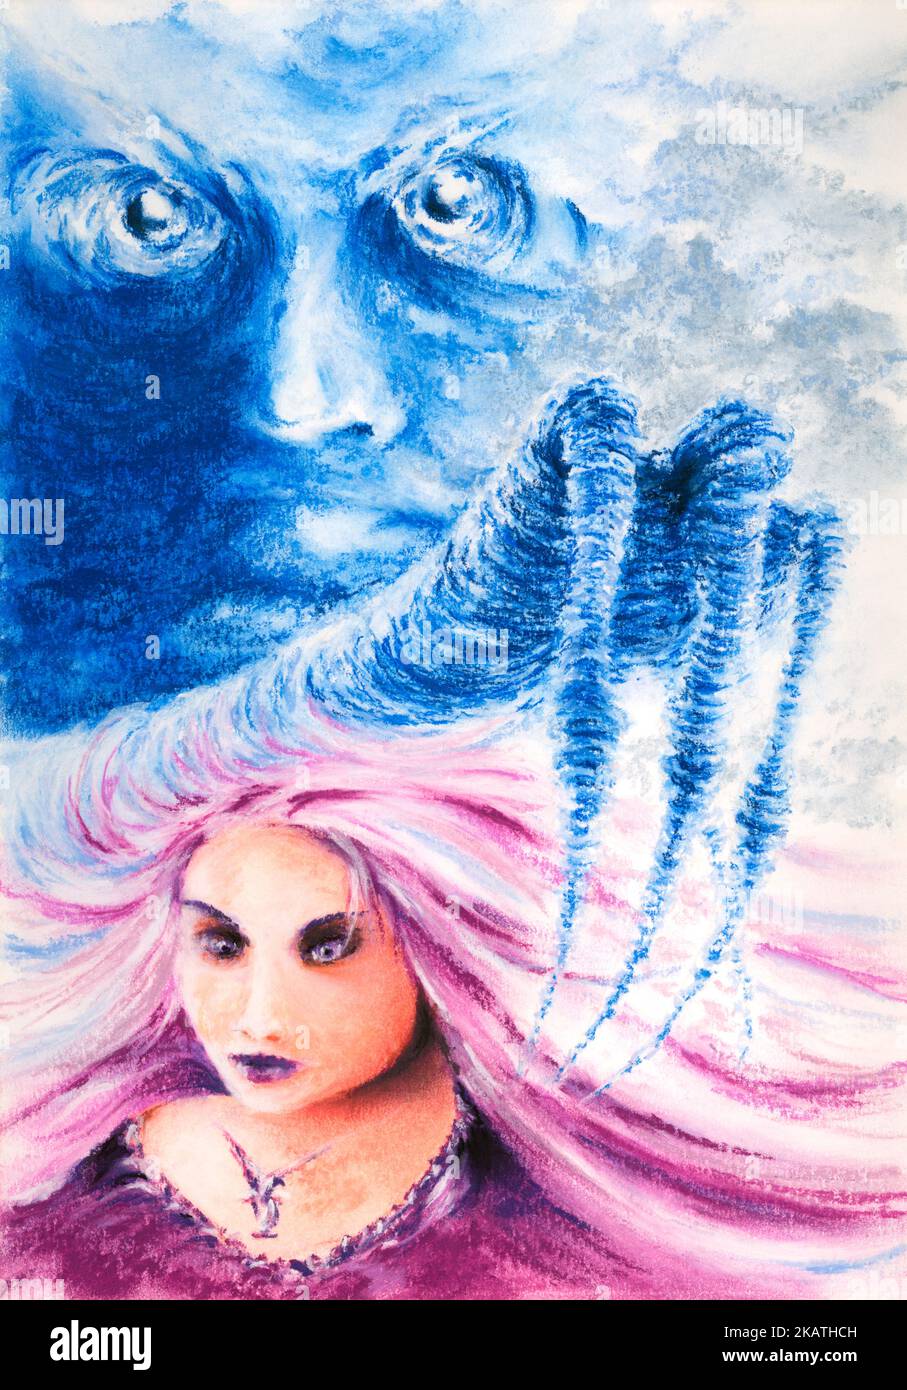 Fantasy daemon-like clouds and girl. Soft pastel on paper. Stock Photo